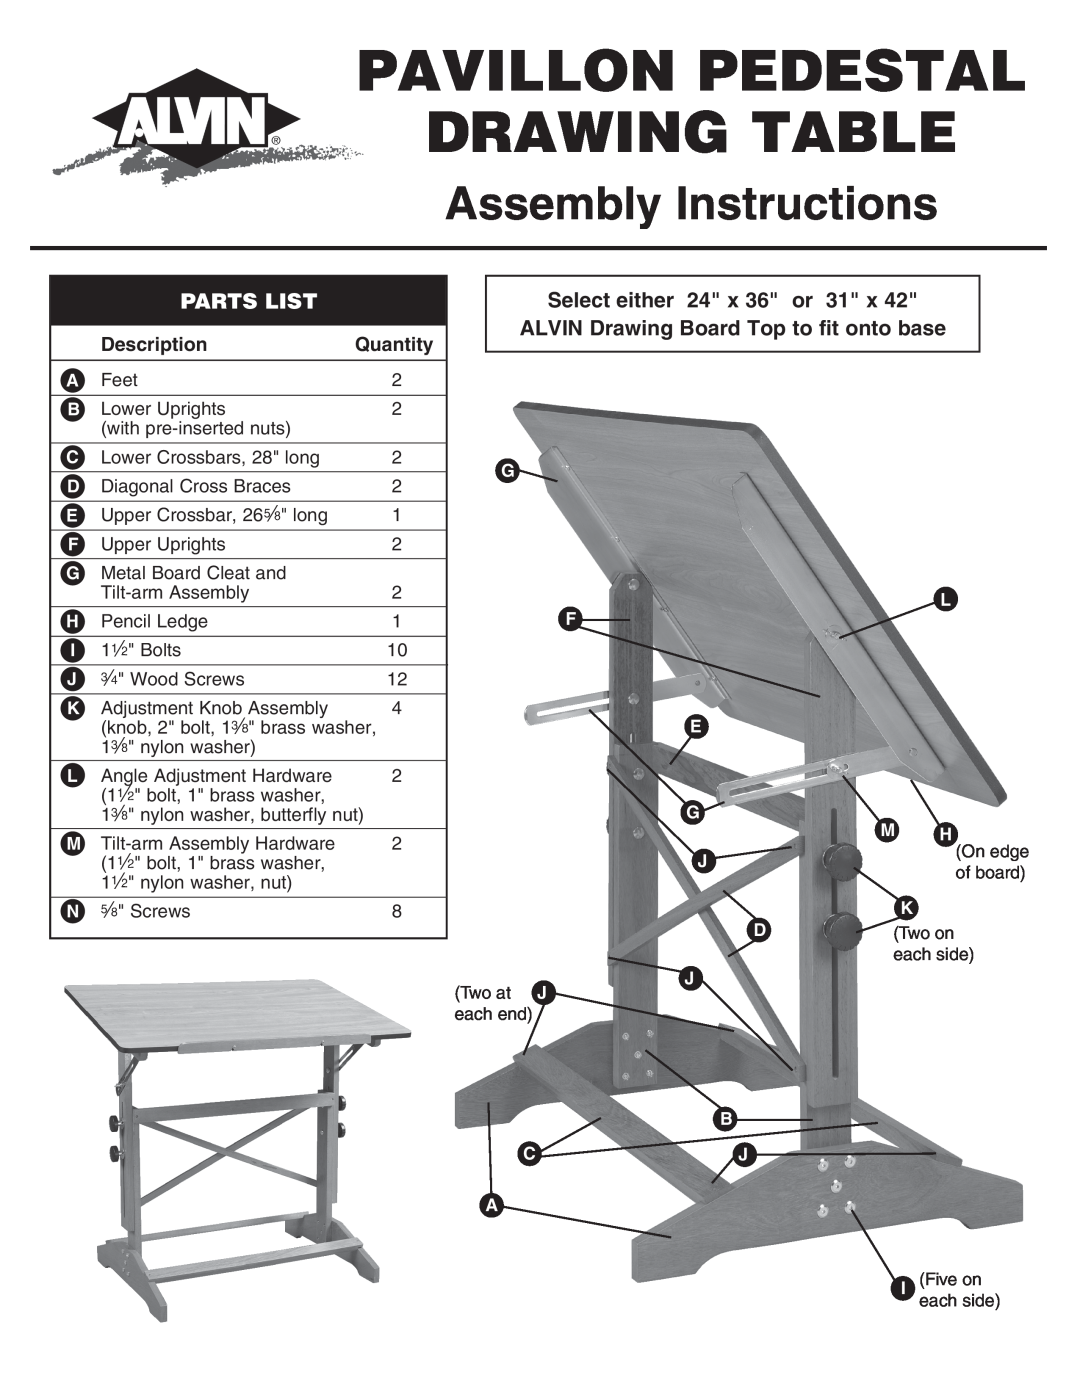 Alvin manual Parts List, Pavillon Pedestal Drawing Table, Assembly Instructions, Select either 24 x 36 or, Description 